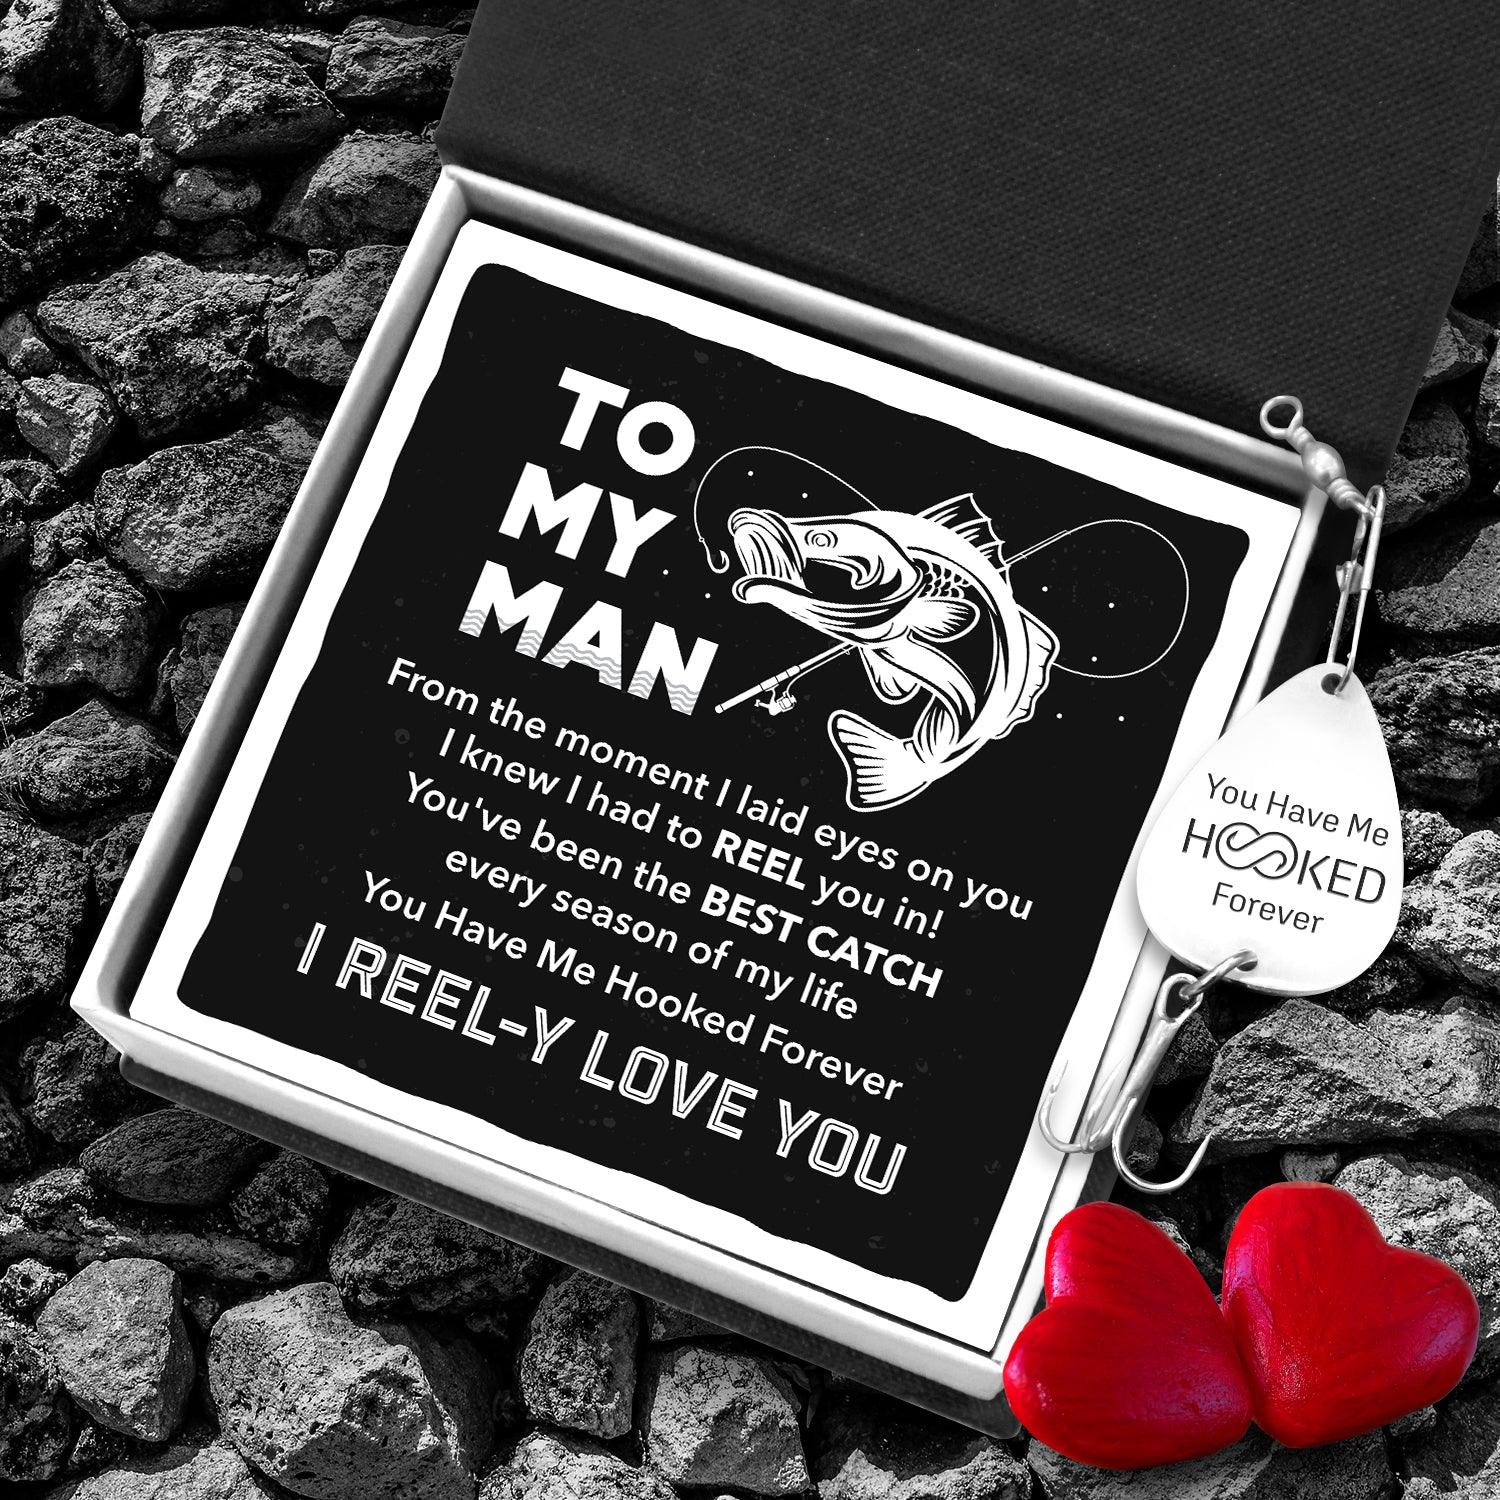 Engraved Fishing Hook - Fishing - To My Man - You've Been The Best Catch Every Season Of My Life - Augfa26015 - Gifts Holder